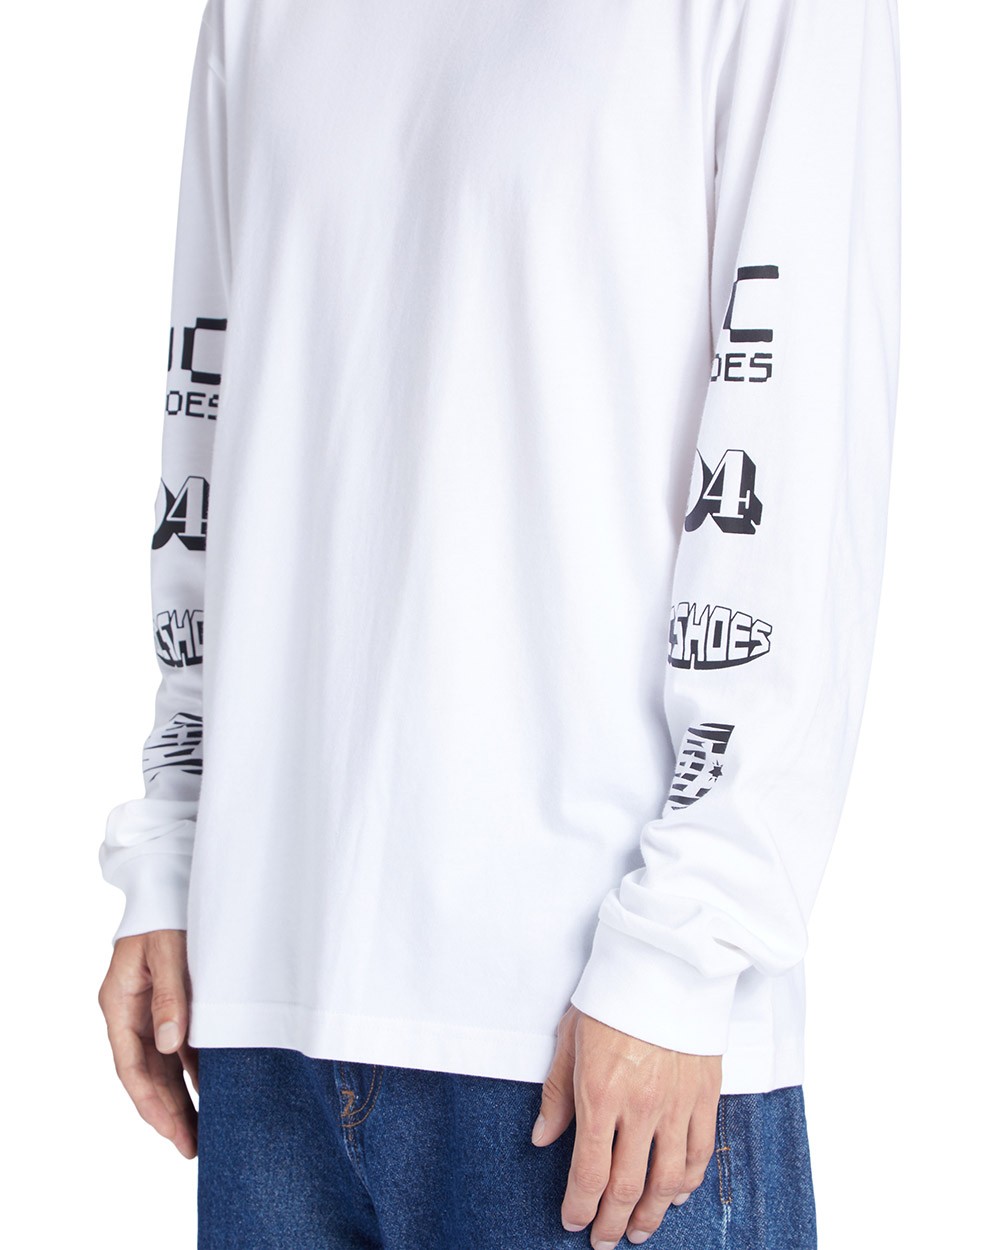 DC SHOES All Smiles - T-Shirt